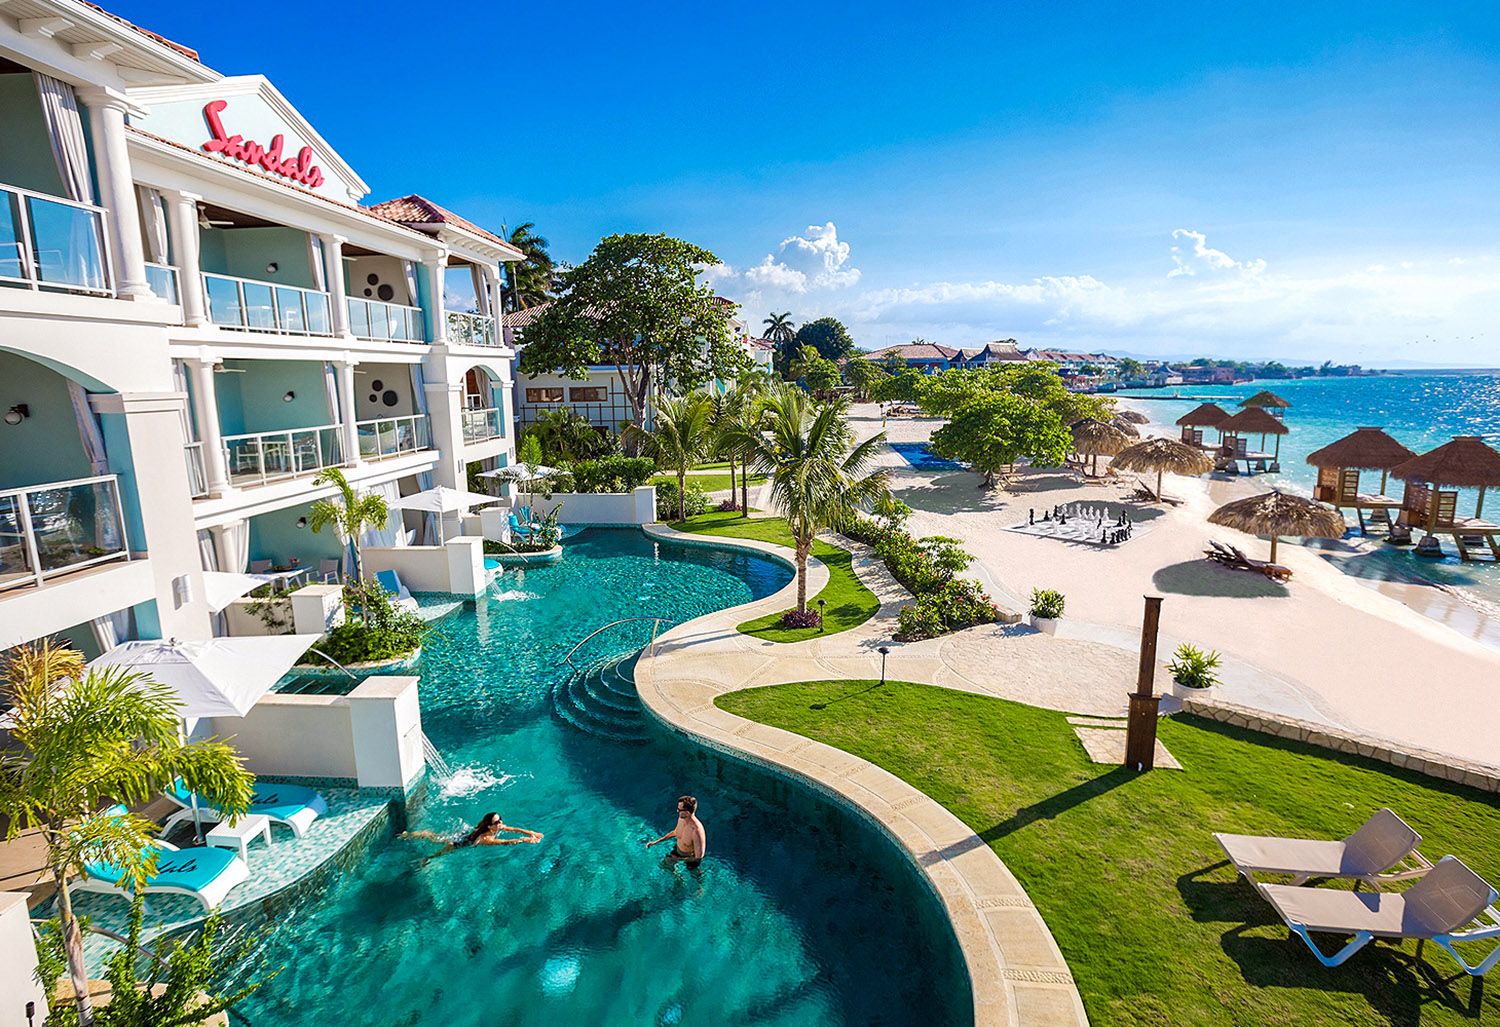 Sandals all-inclusive resort in Montego Bay